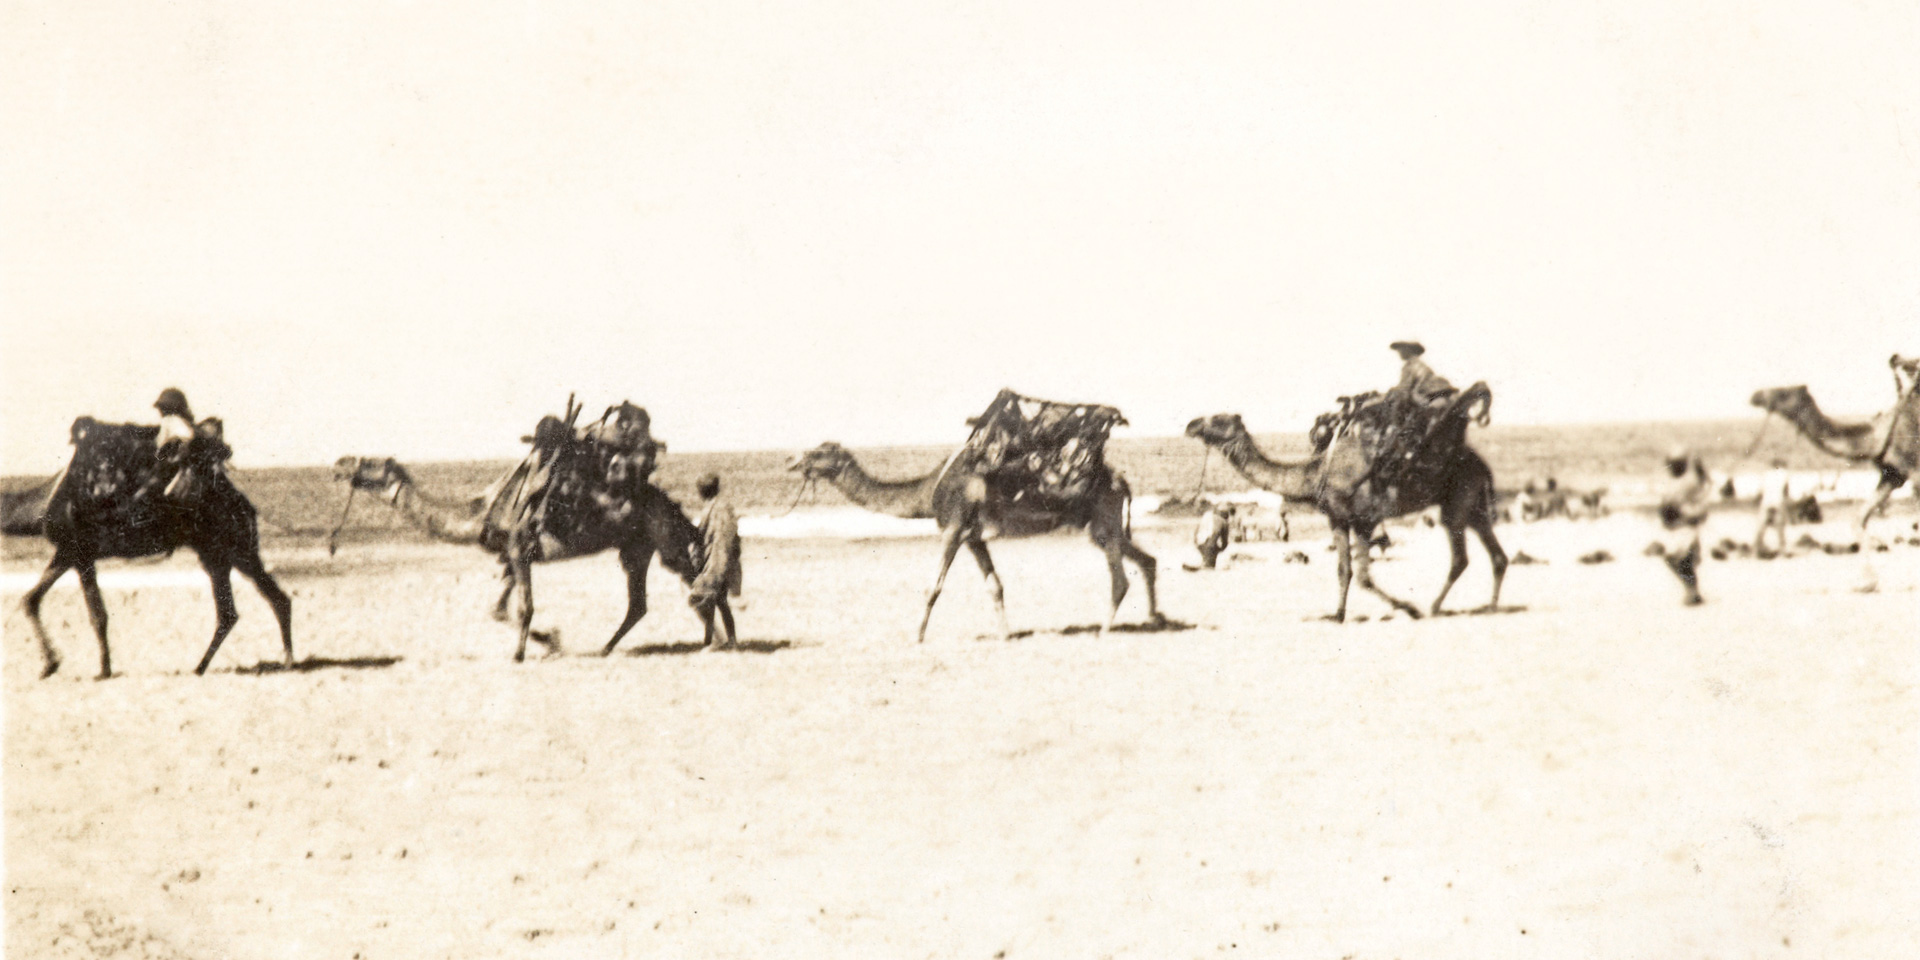 Preparations ahead of the Third Battle of Gaza, 1917